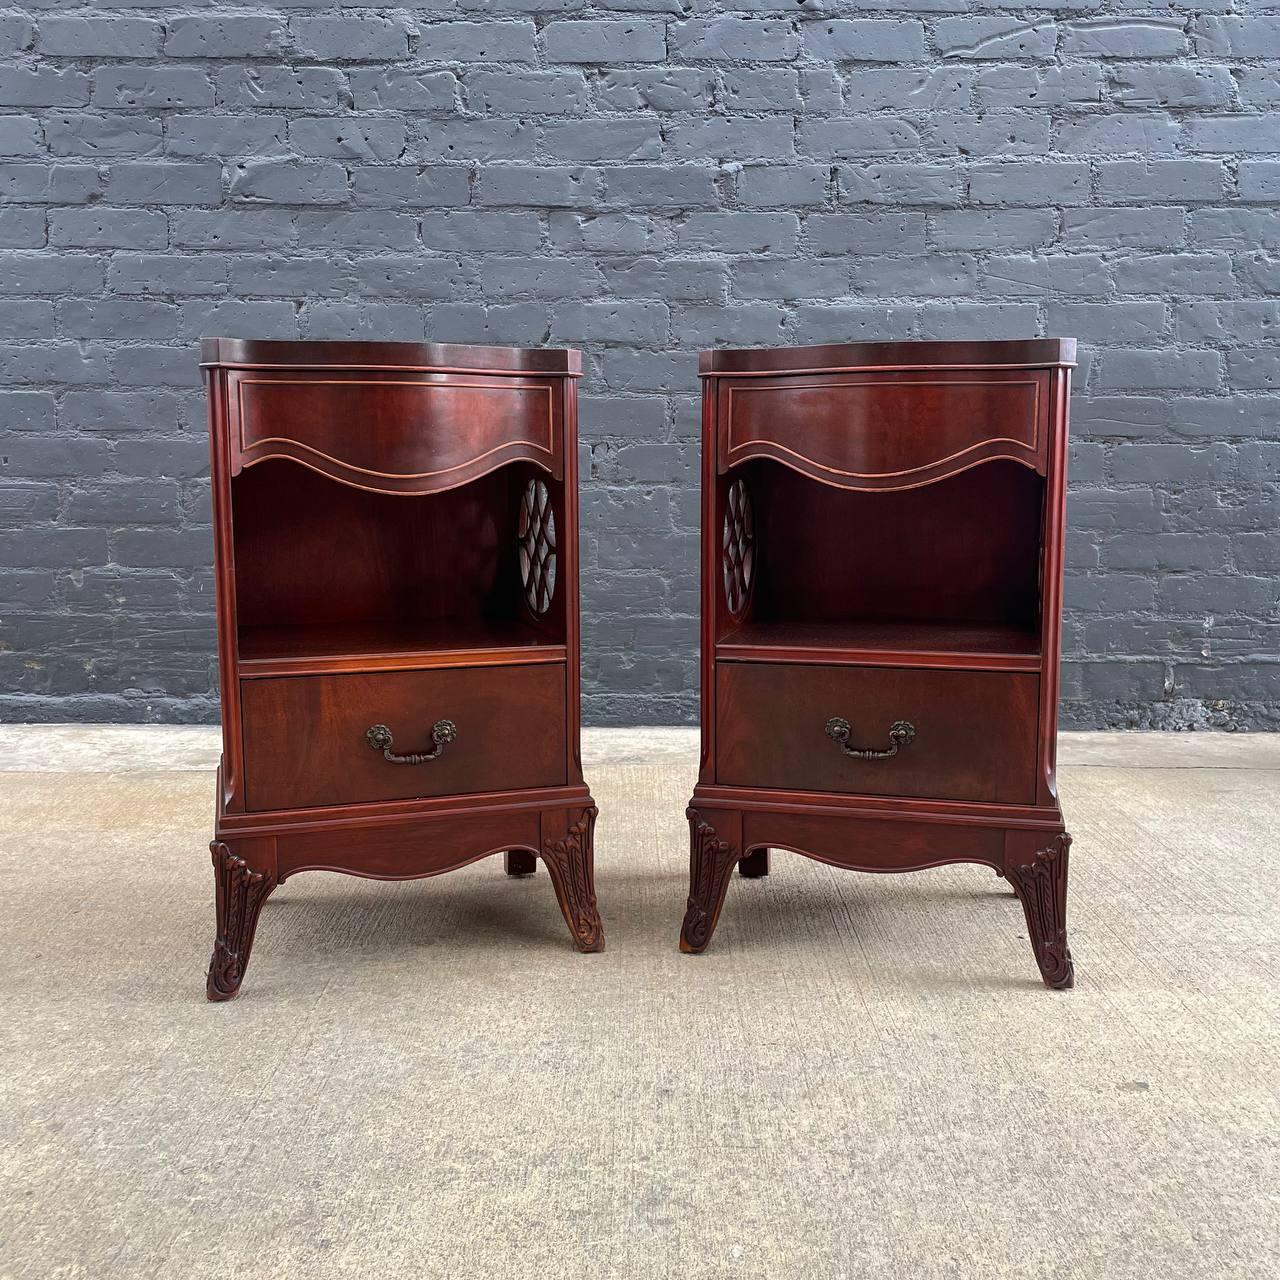 Pair Antique Federal Carved Mahogany Night Stands, 1920s

Designer: Unknown
Country: United States 
Manufacturer: Unknown
Materials: Mahogany
Style: American Antique
Year: 1920s

$1,895 pair 

Dimensions:
29.50”H x 18”W x 14”D.